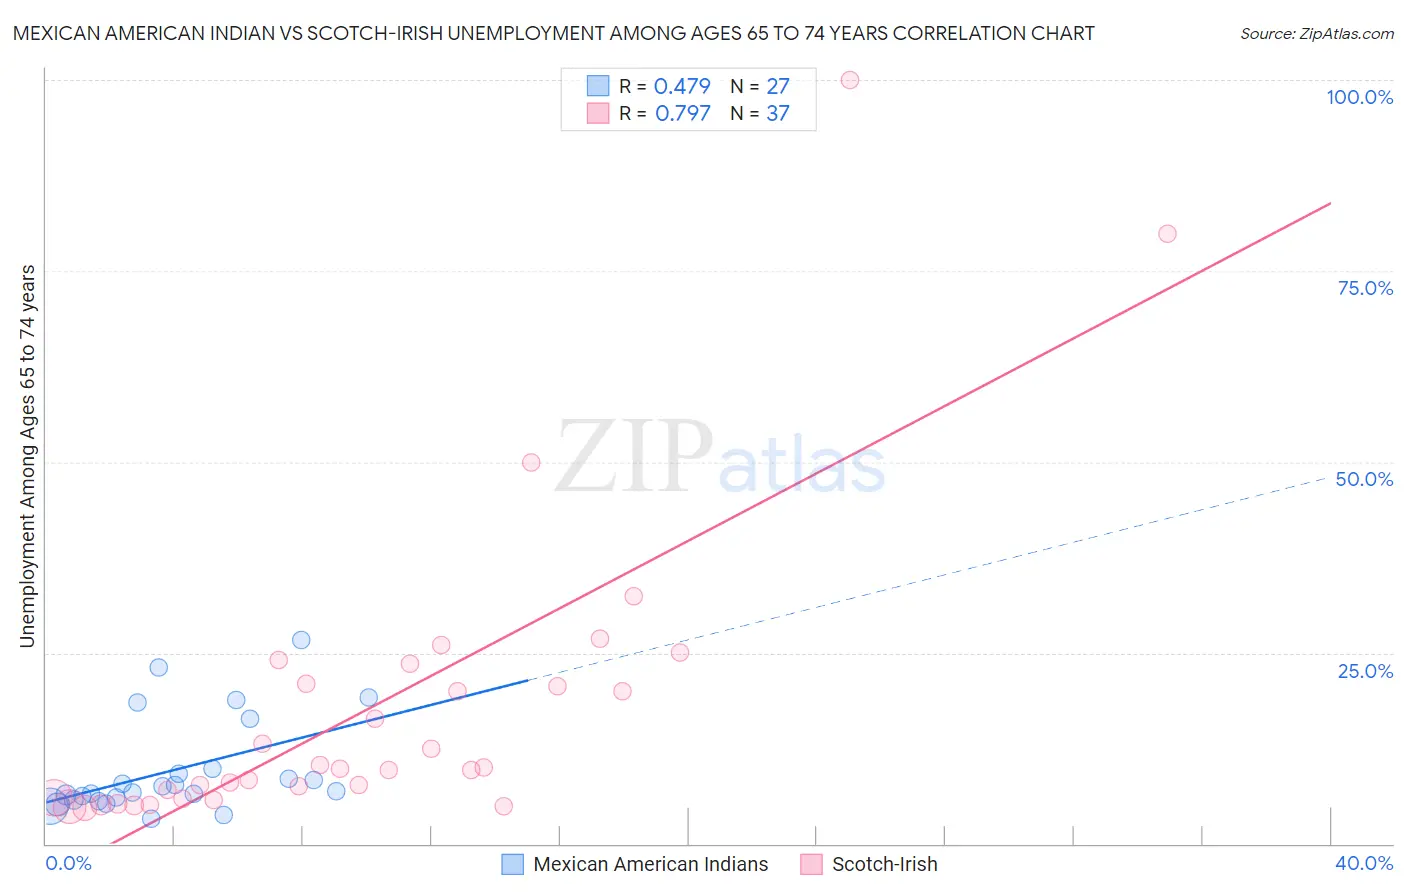 Mexican American Indian vs Scotch-Irish Unemployment Among Ages 65 to 74 years